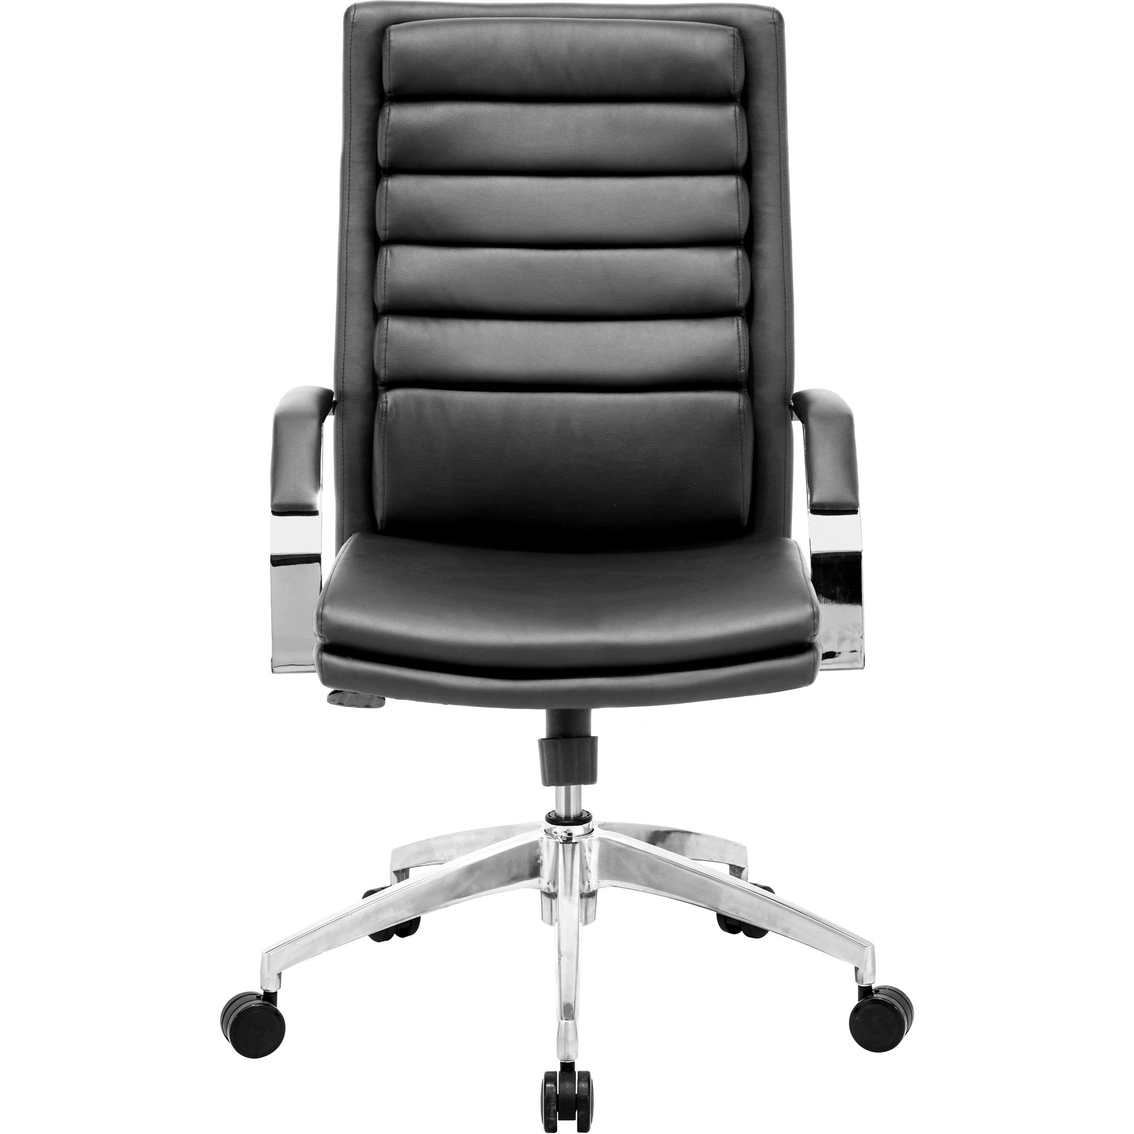 Zuo Modern Director Comfort Office Chair - Image 3 of 4